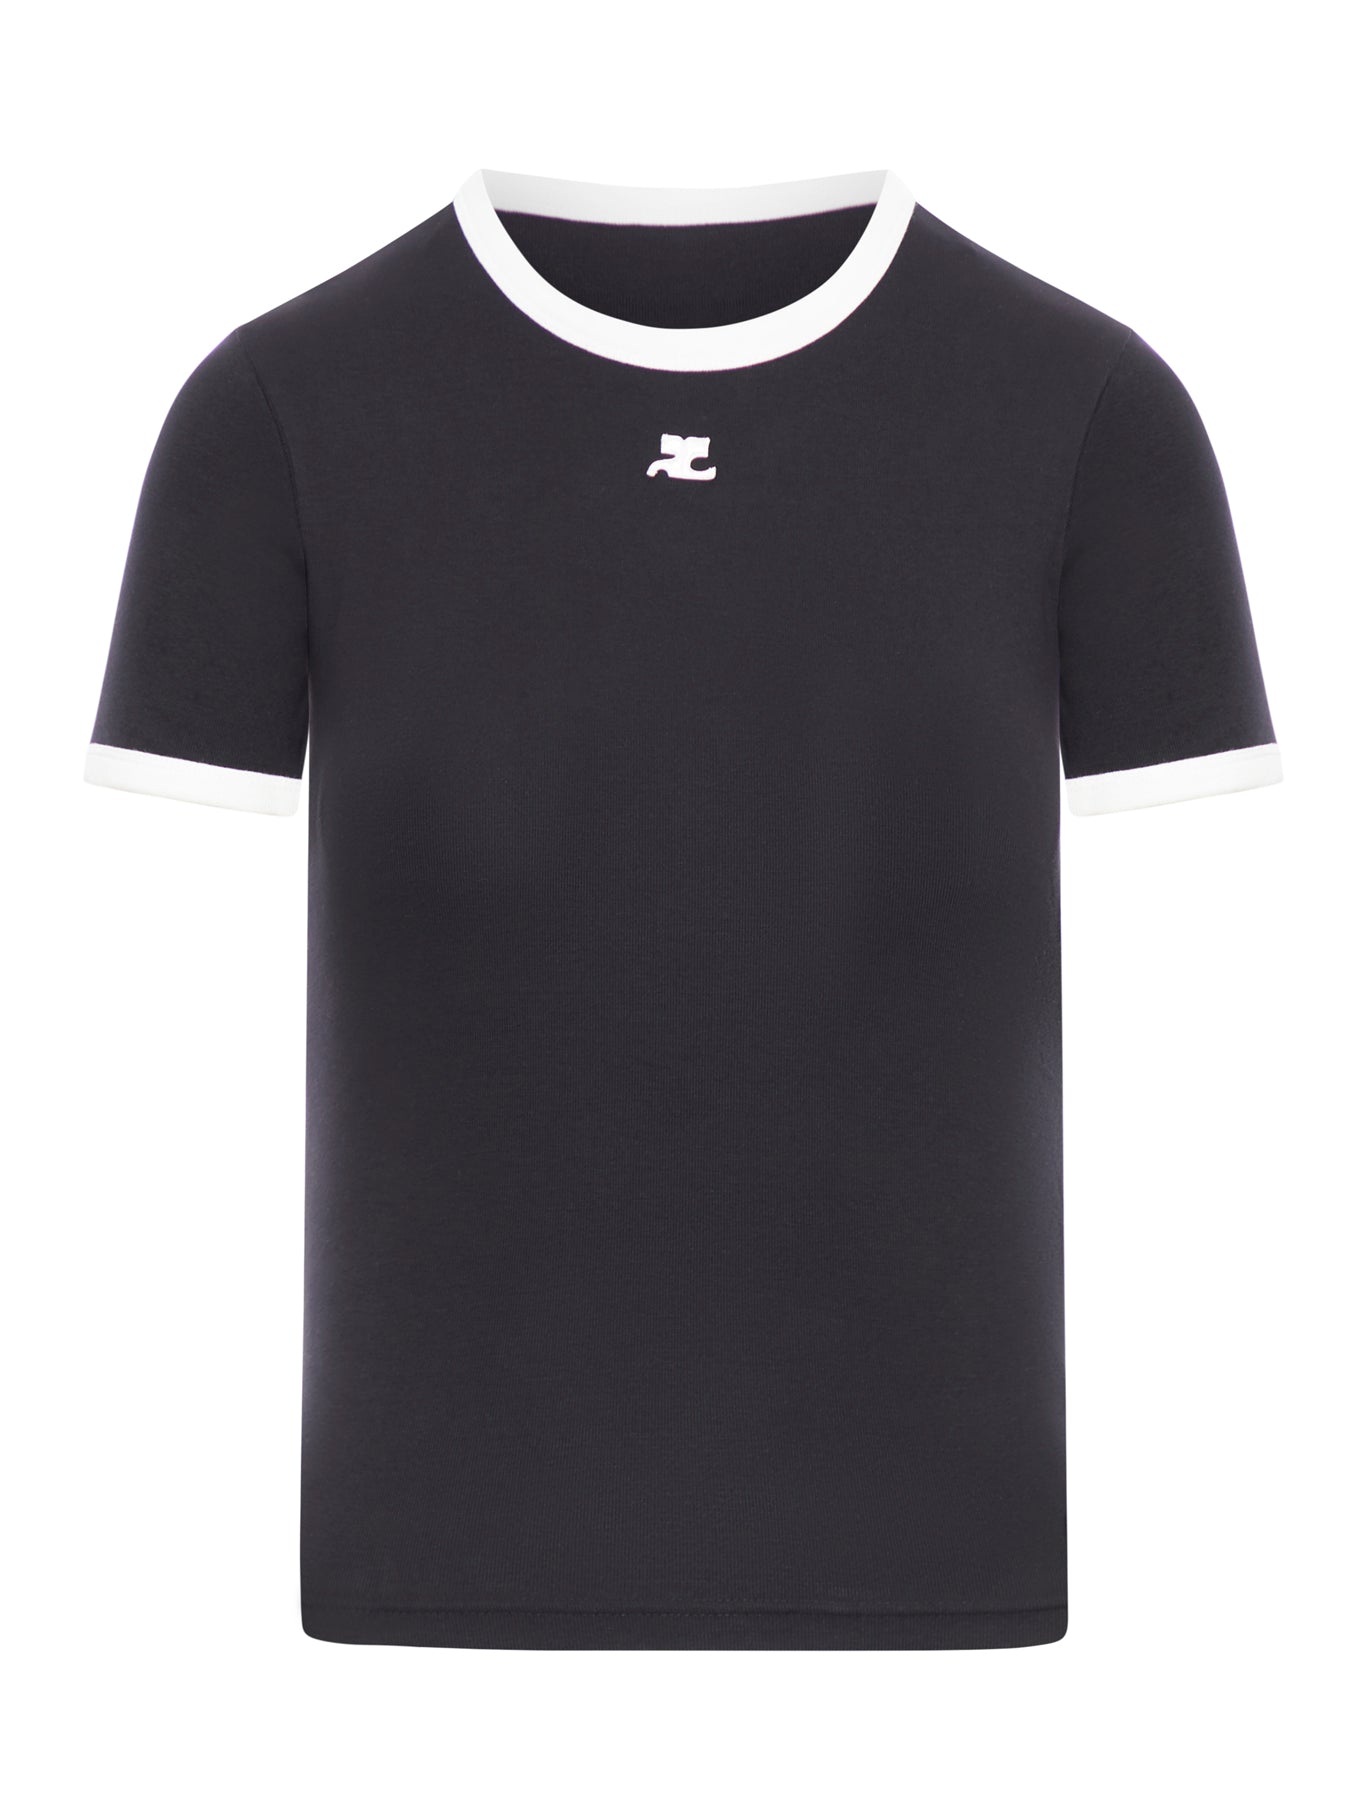 Cotton T-shirt with contrasting profiles